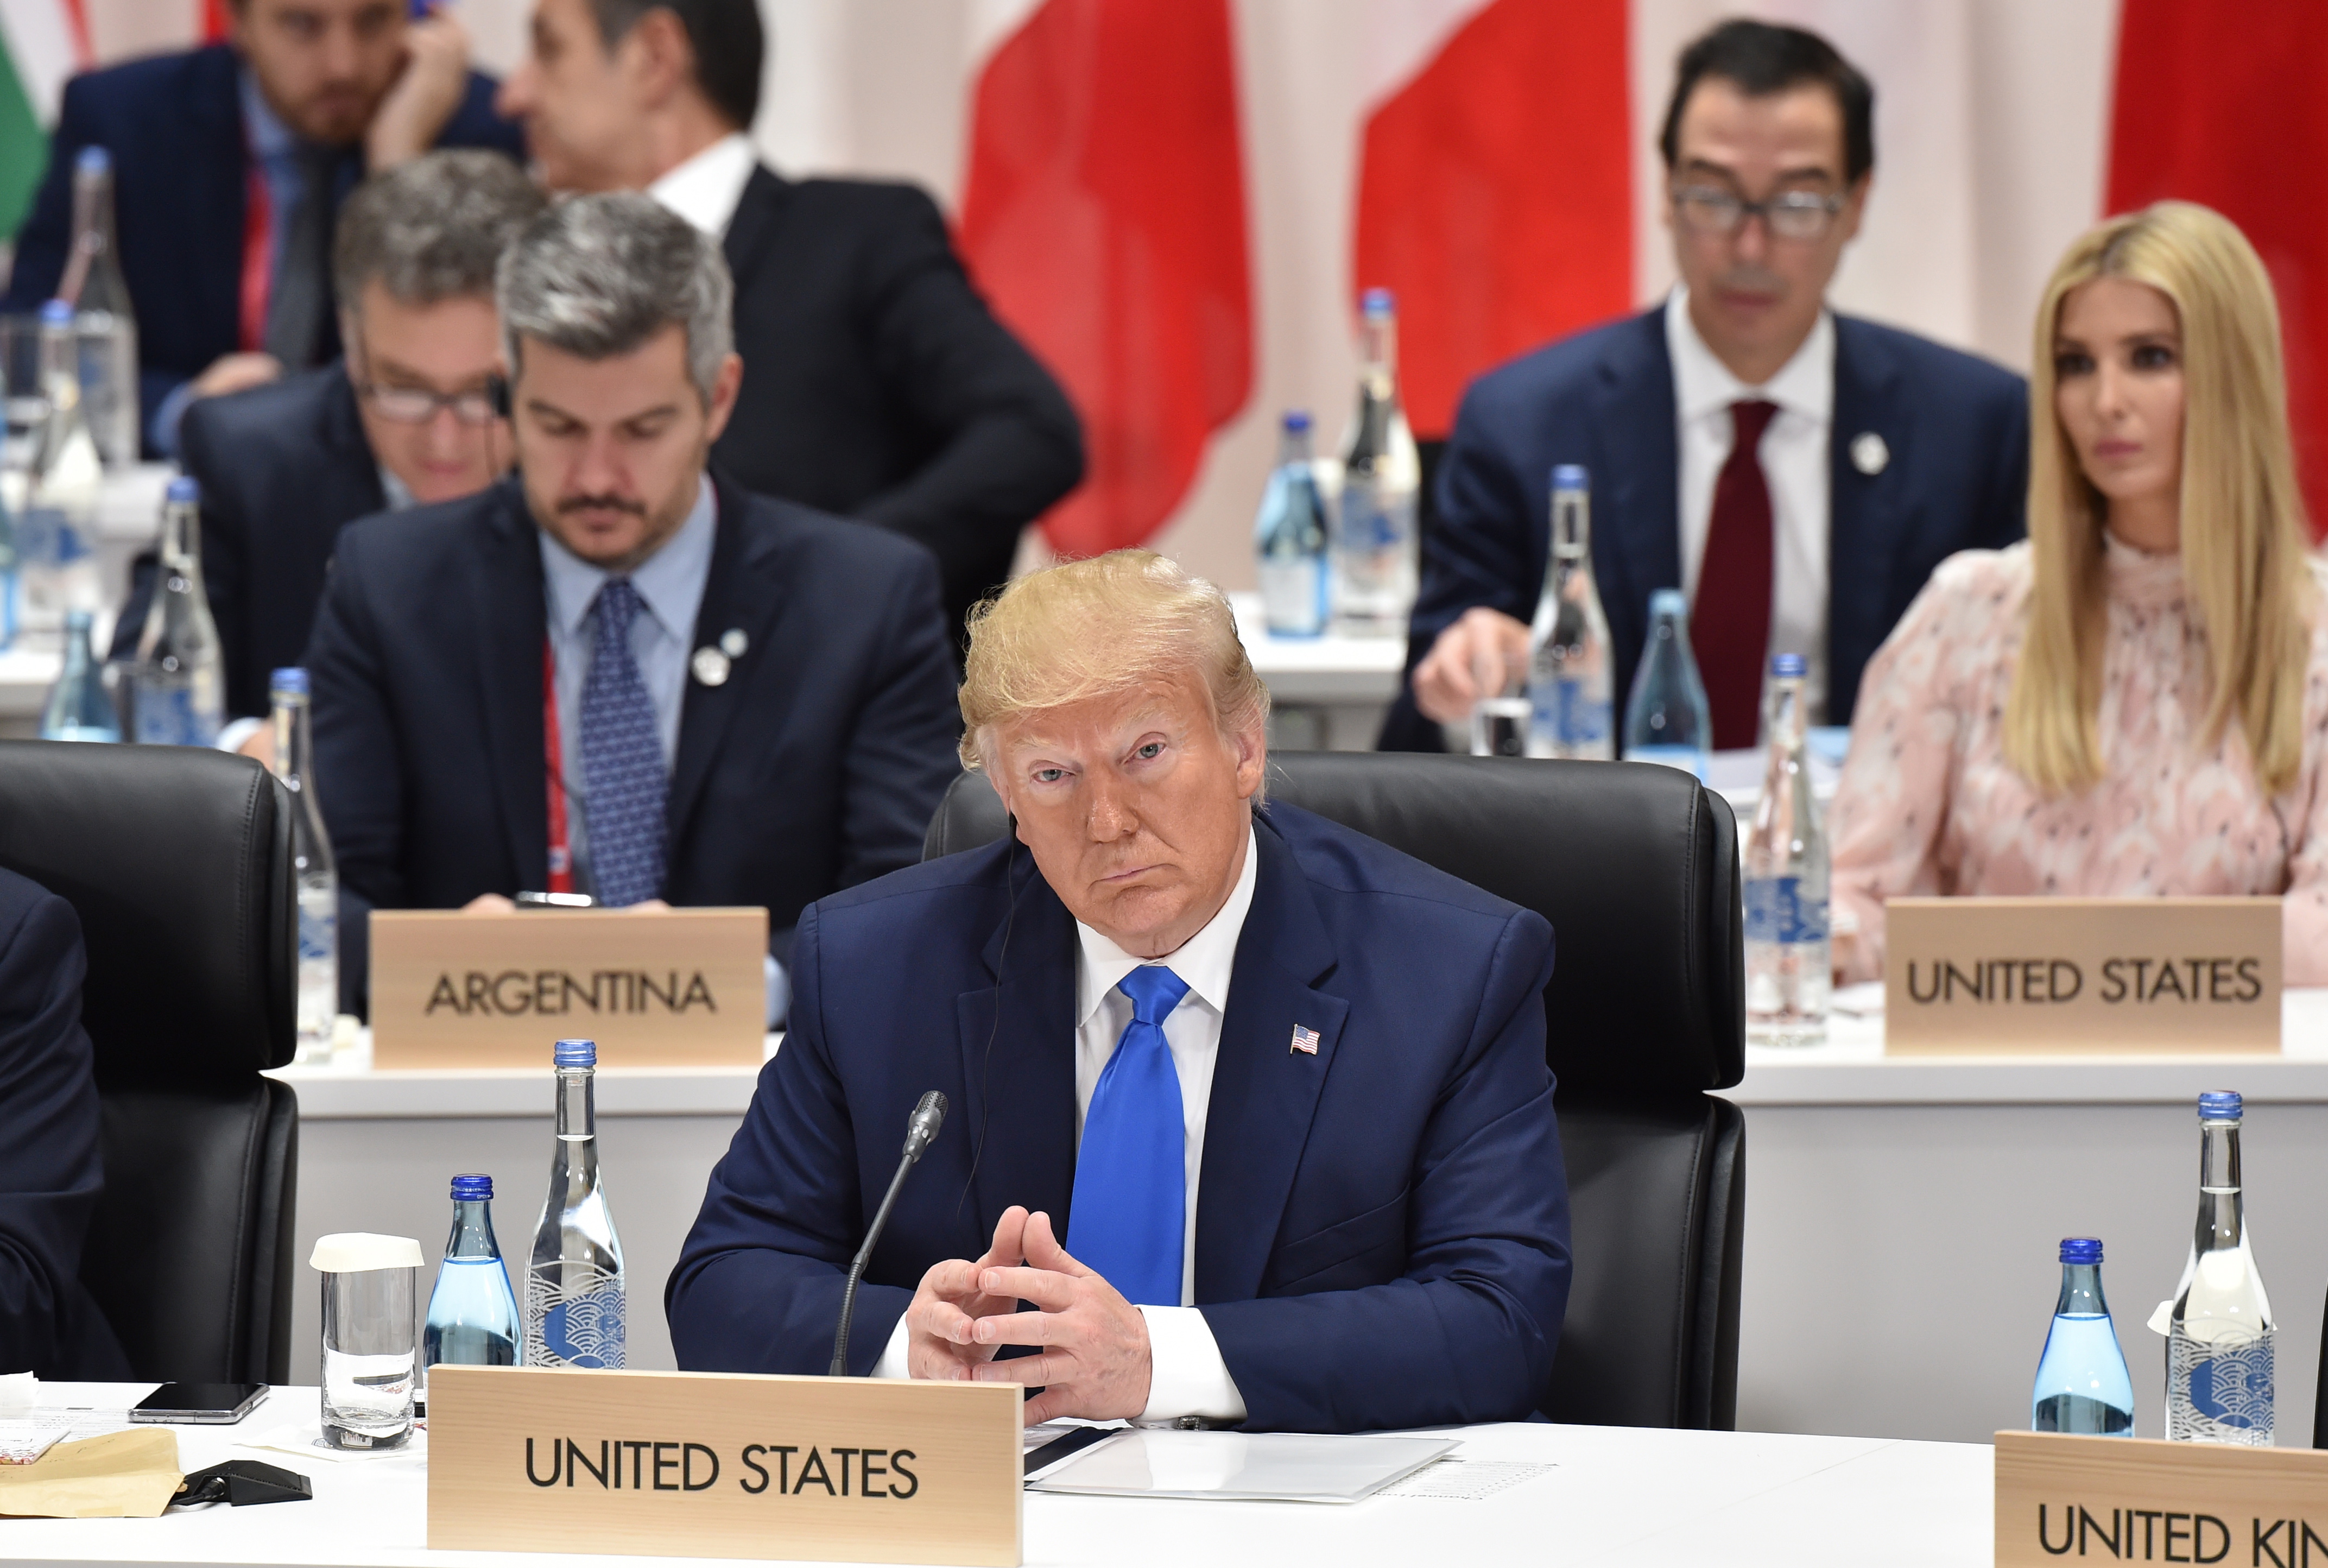 epa07681417 US President Donald Trump (R) attends the second day of the G20 summit in Osaka, Japan, 29 June 2019. It is the first time Japan will host a G20 summit. The summit gathers leaders from 19 countries and the European Union to discuss topics such as global economy, trade and investment, innovation and employment.  EPA/KAZUHIRO NOGI / POOL